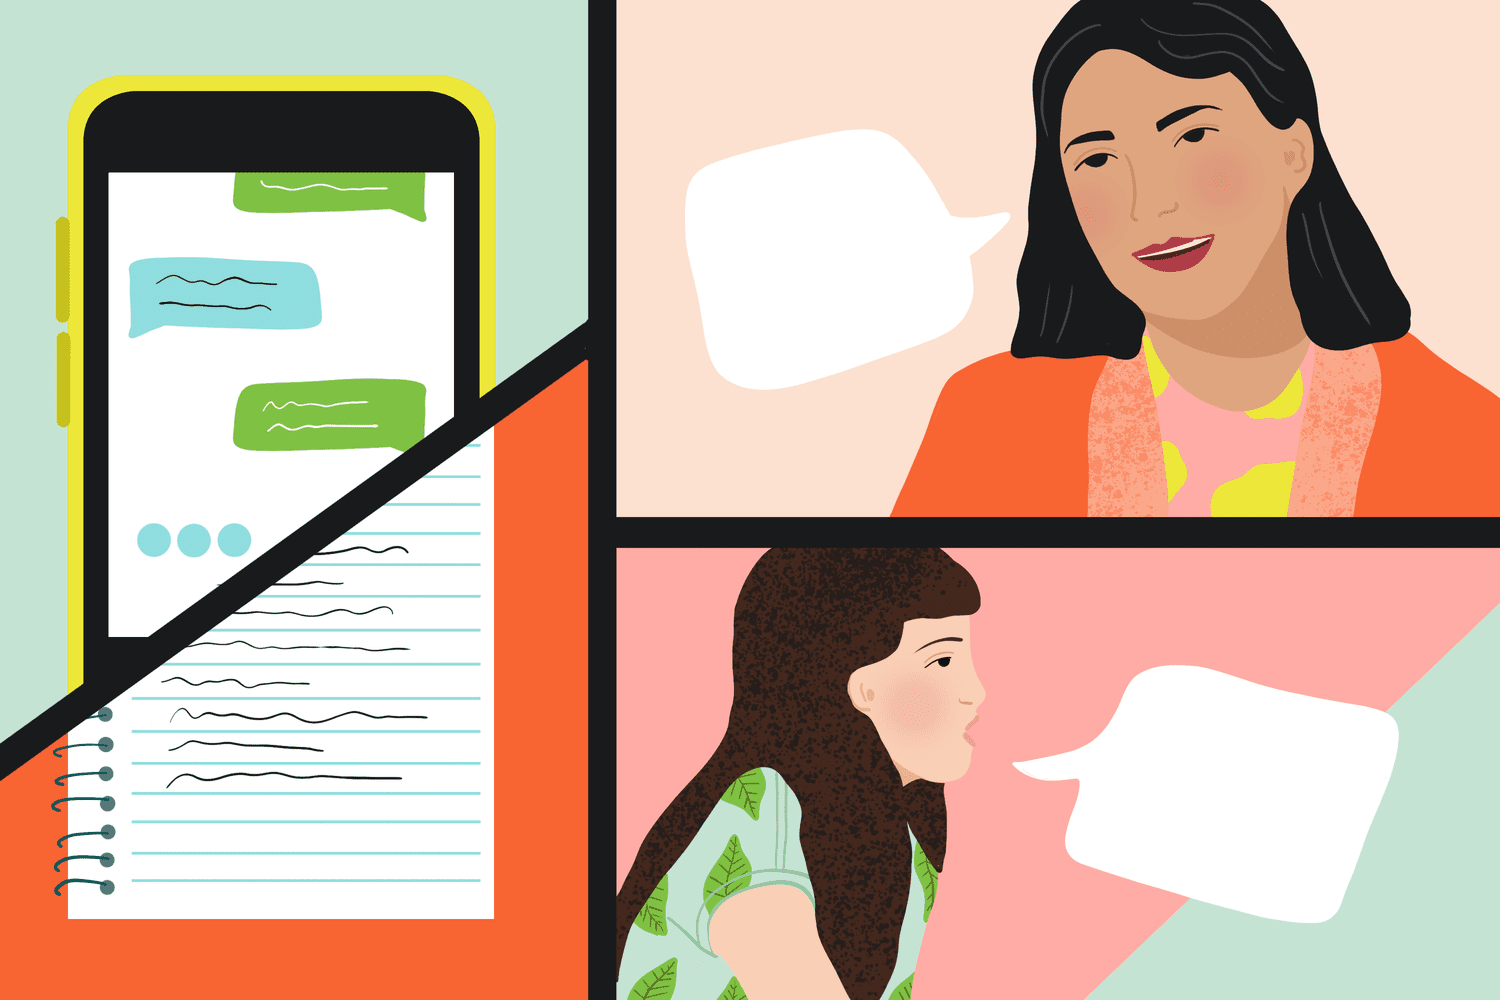 An illustration of a mom speaking with her daughter.